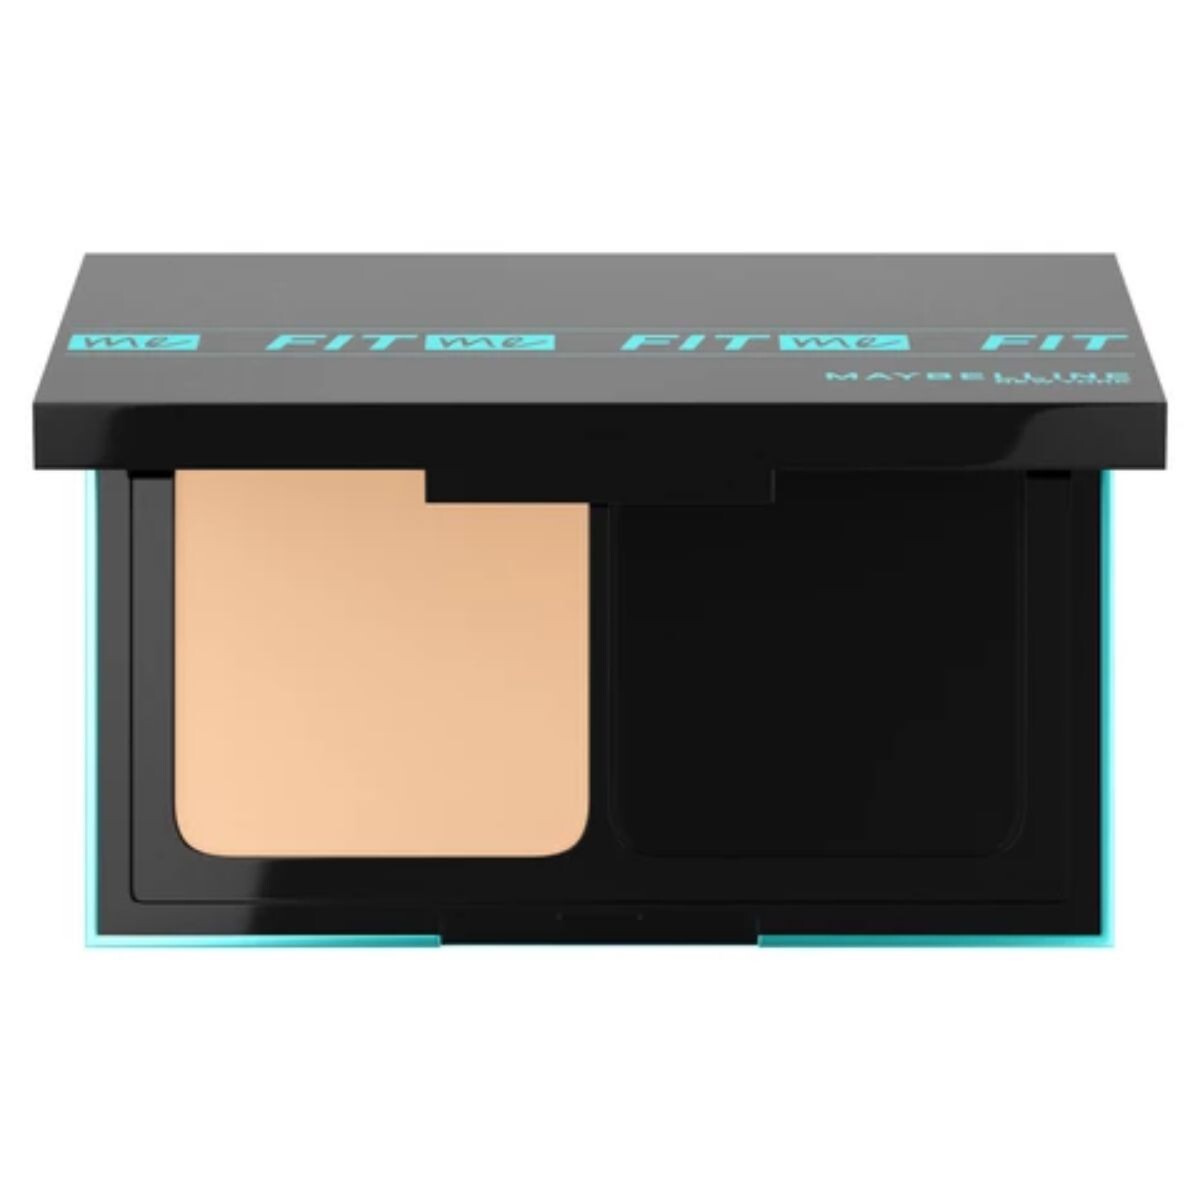 Polvo Compacto Maybelline Fit Me Poreless Powder Foundation 9g - Natural Beige 220 